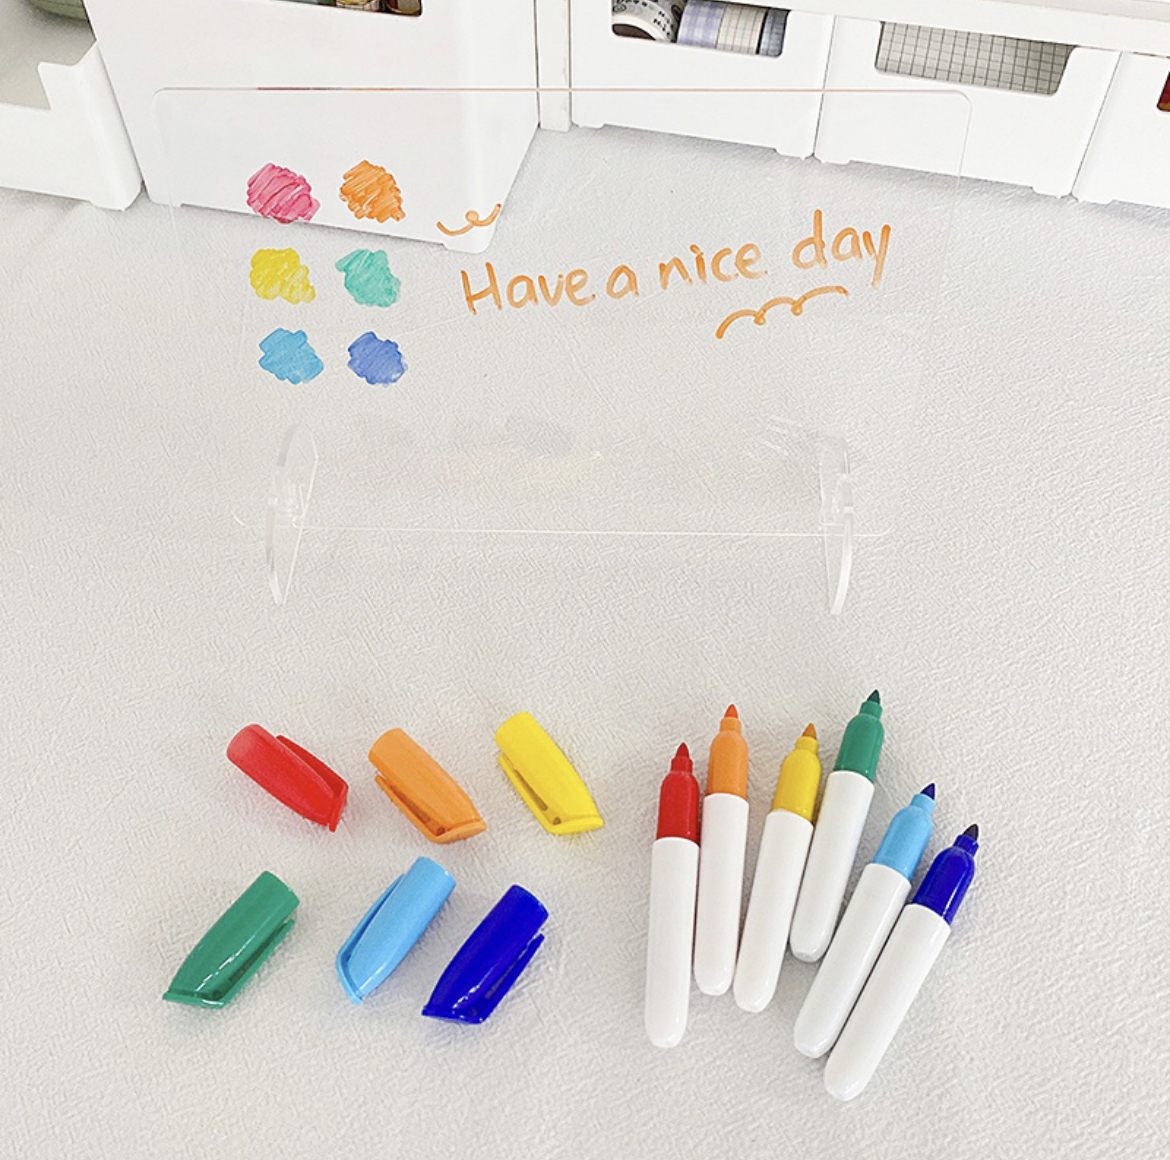 custom wholesale School office home Kids Record daily information note board Clear Acrylic Dry Erase Memo Tablet with Base